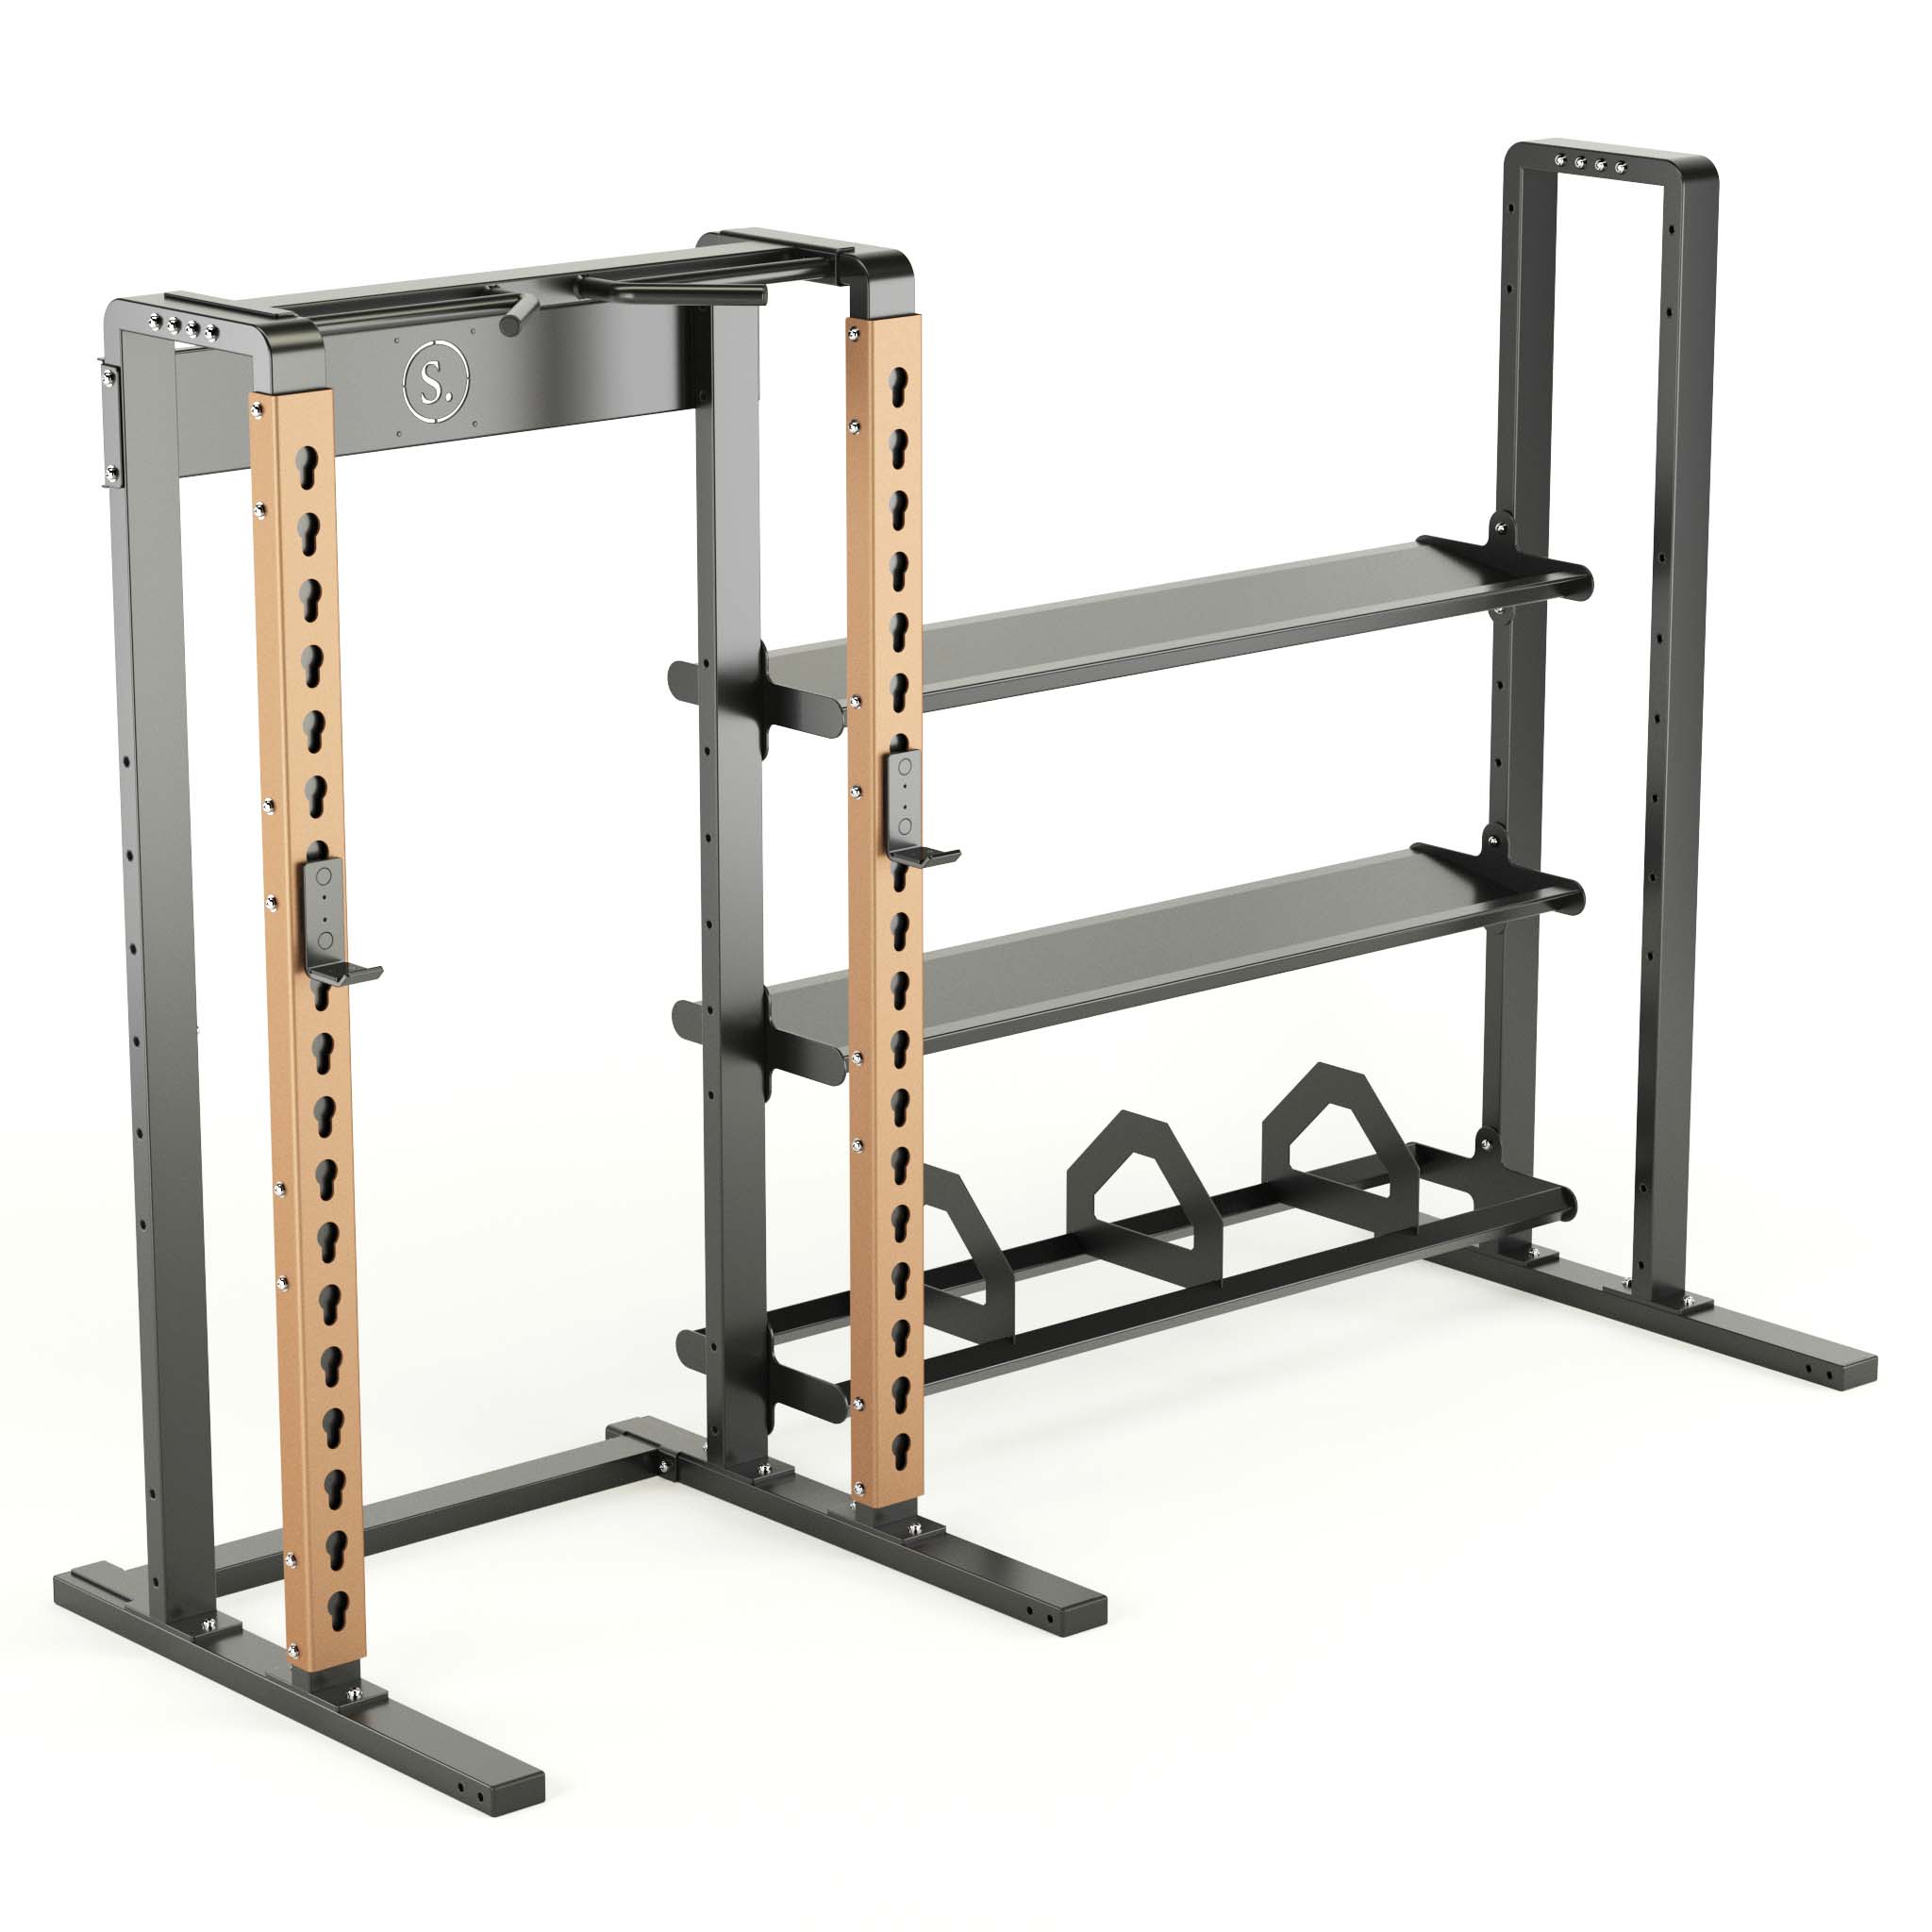 Solo half rack with wide storage in bronze